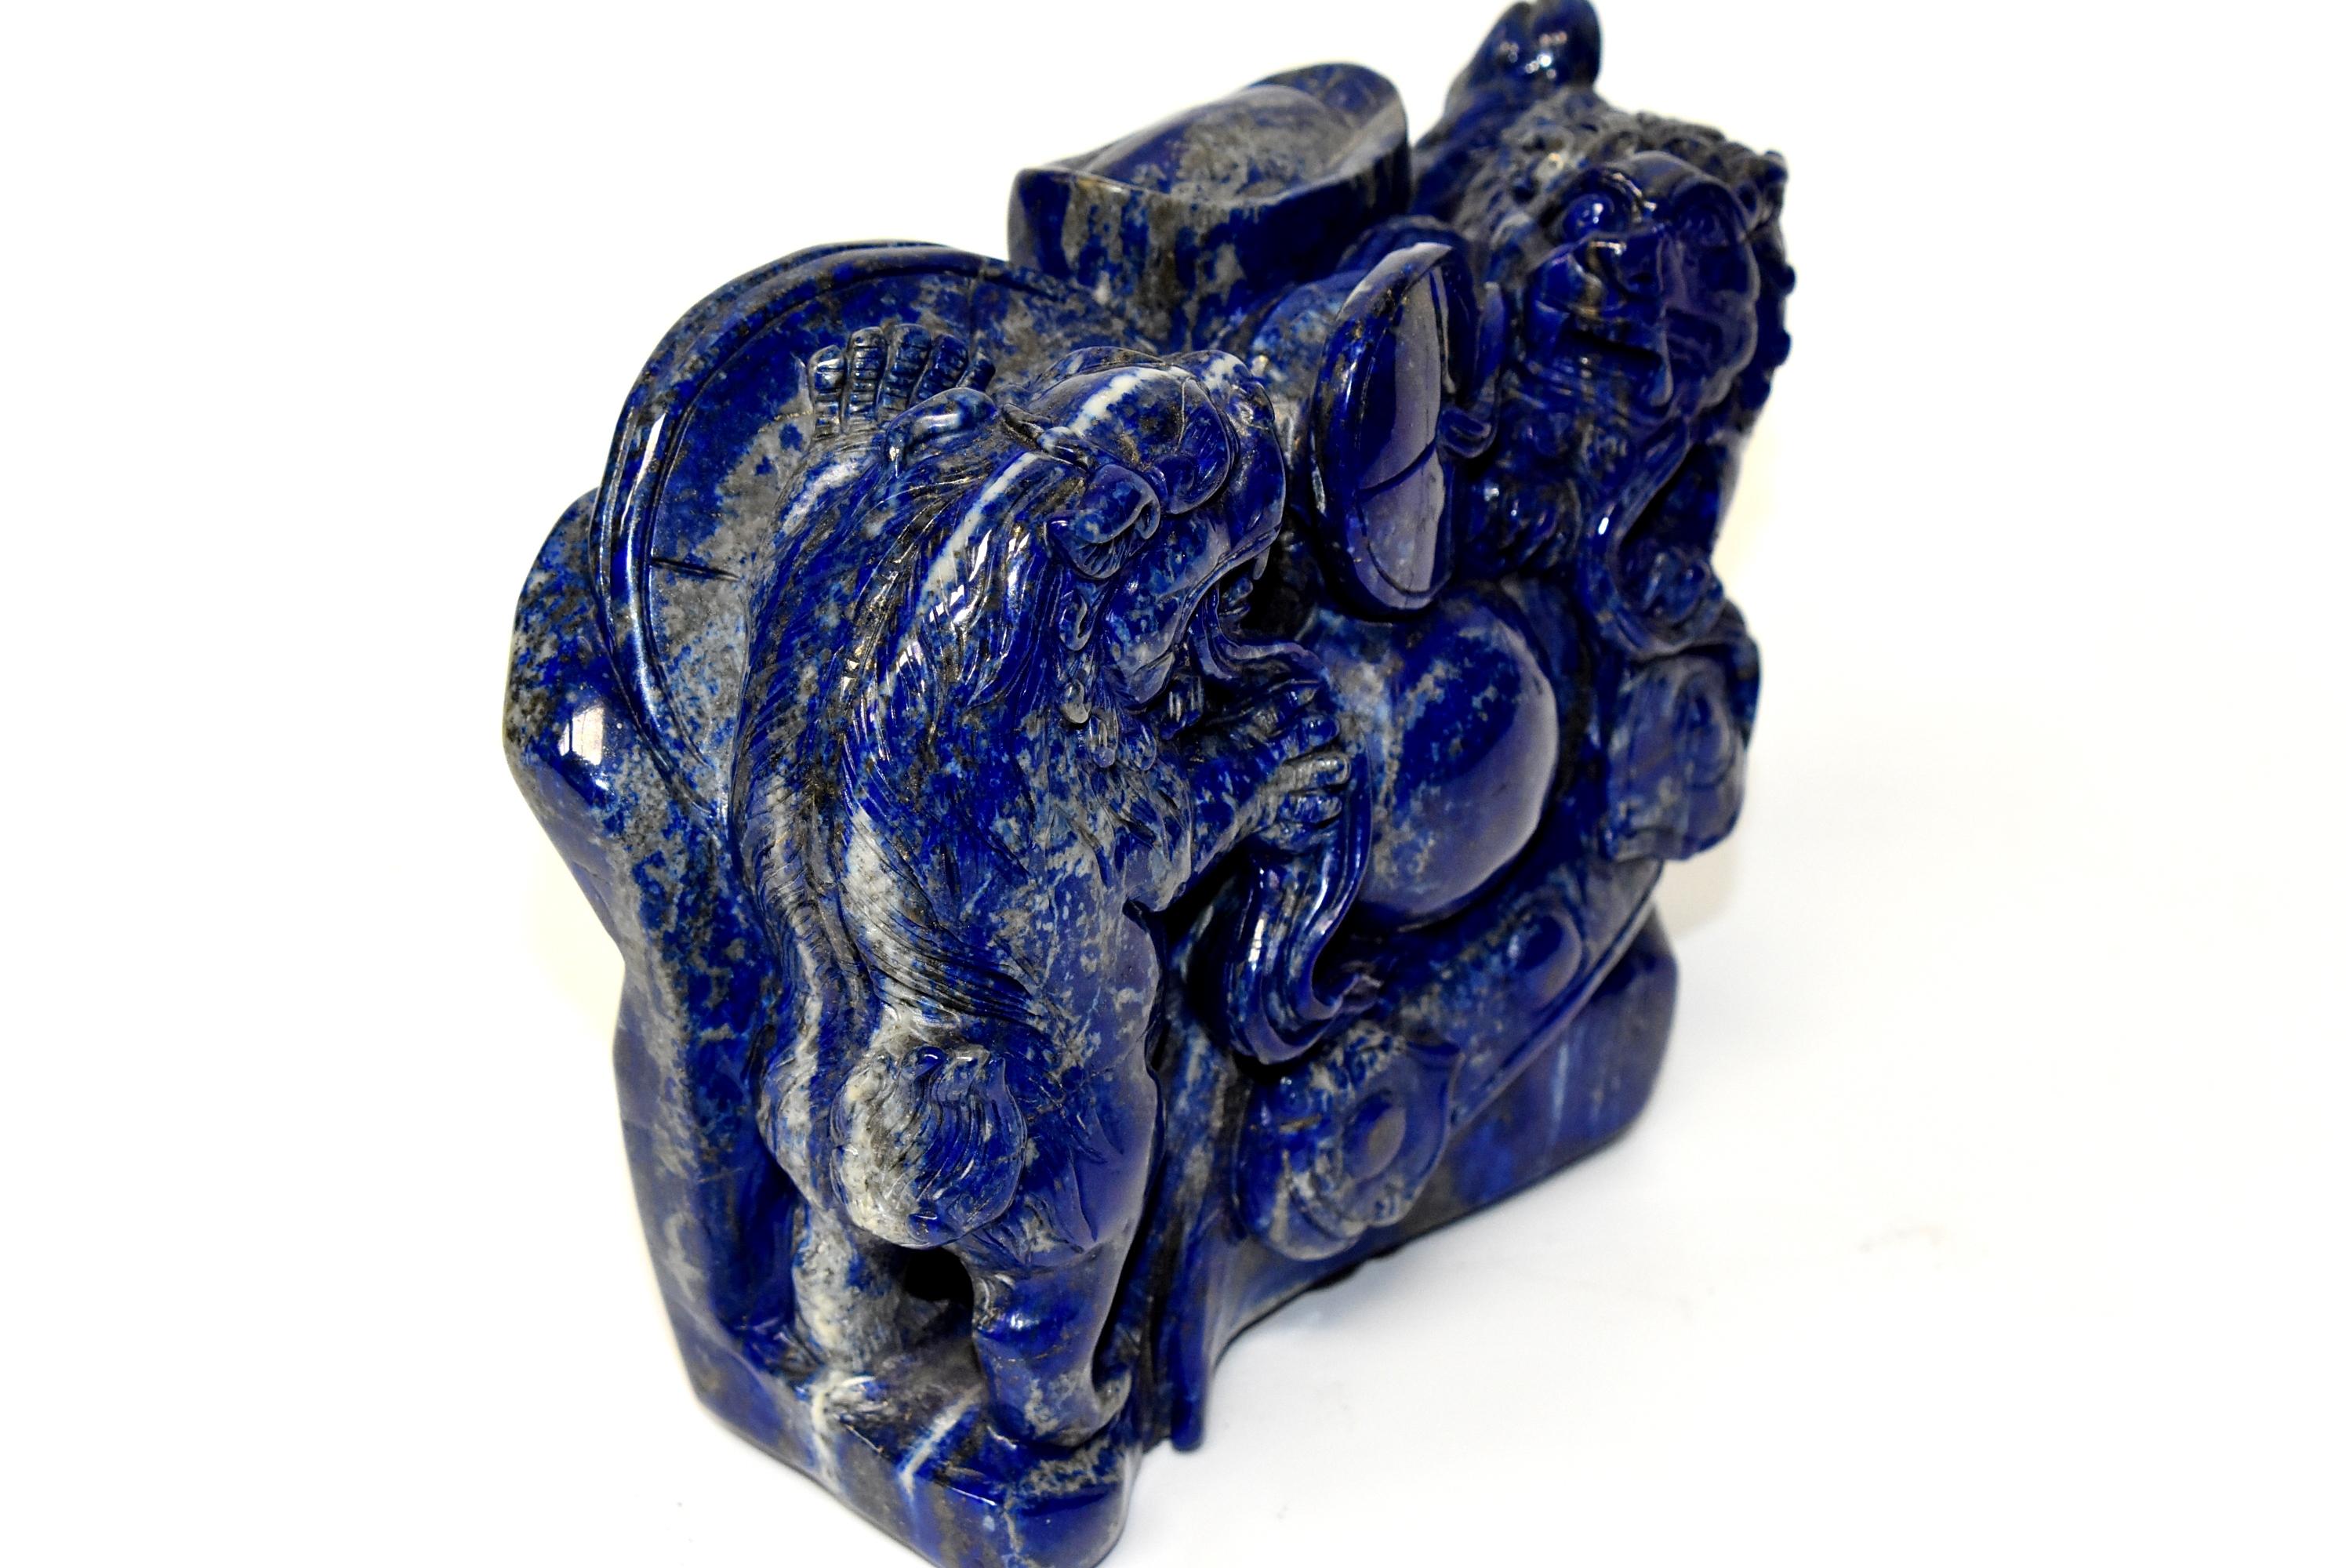 Hand-Carved Natural Lapis Lazuli 8 lb Block with Carved Lions